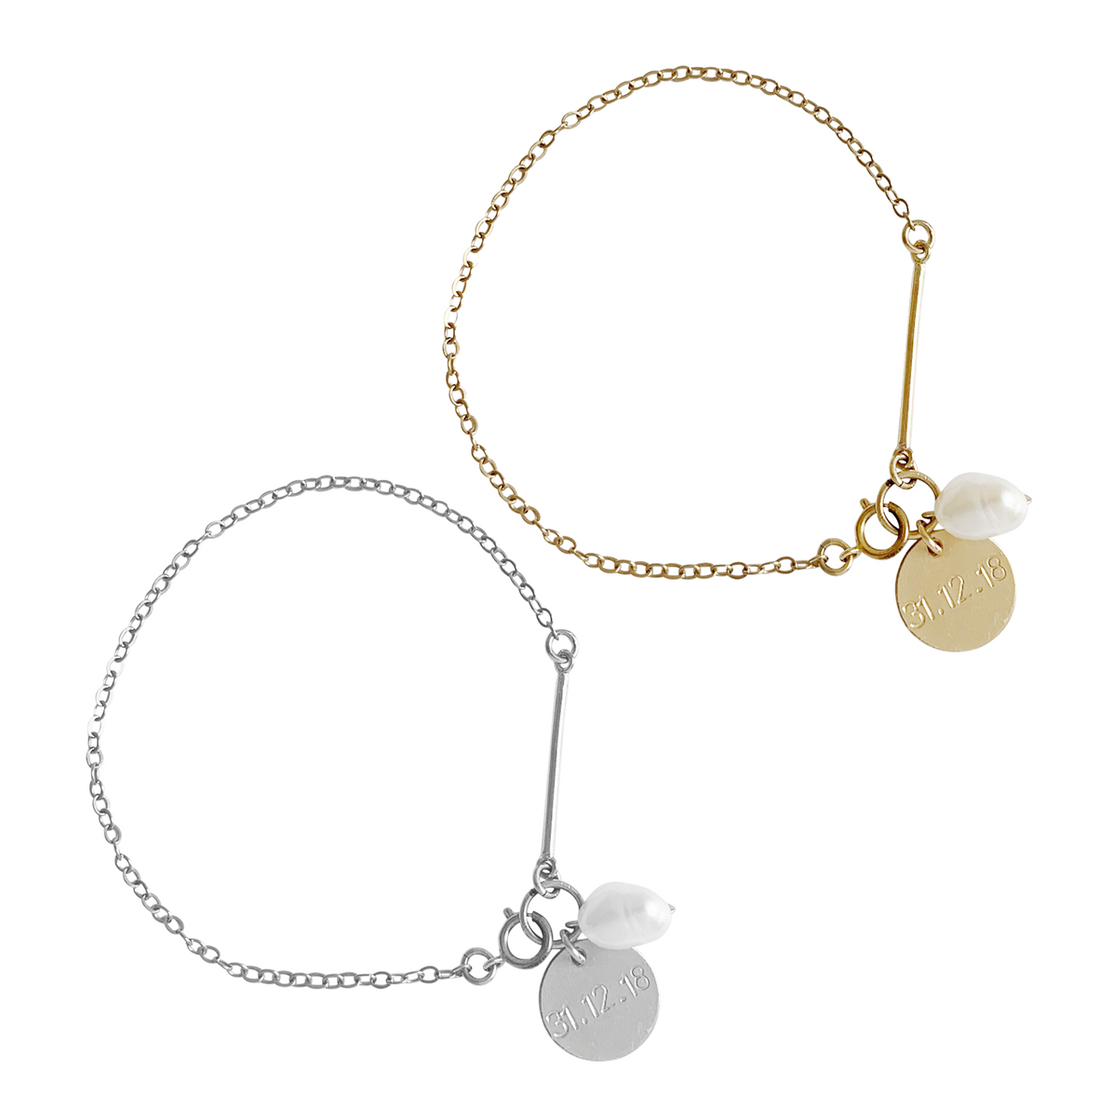 Penny Pearl and Disc Bracelet in Gold & Silver Color